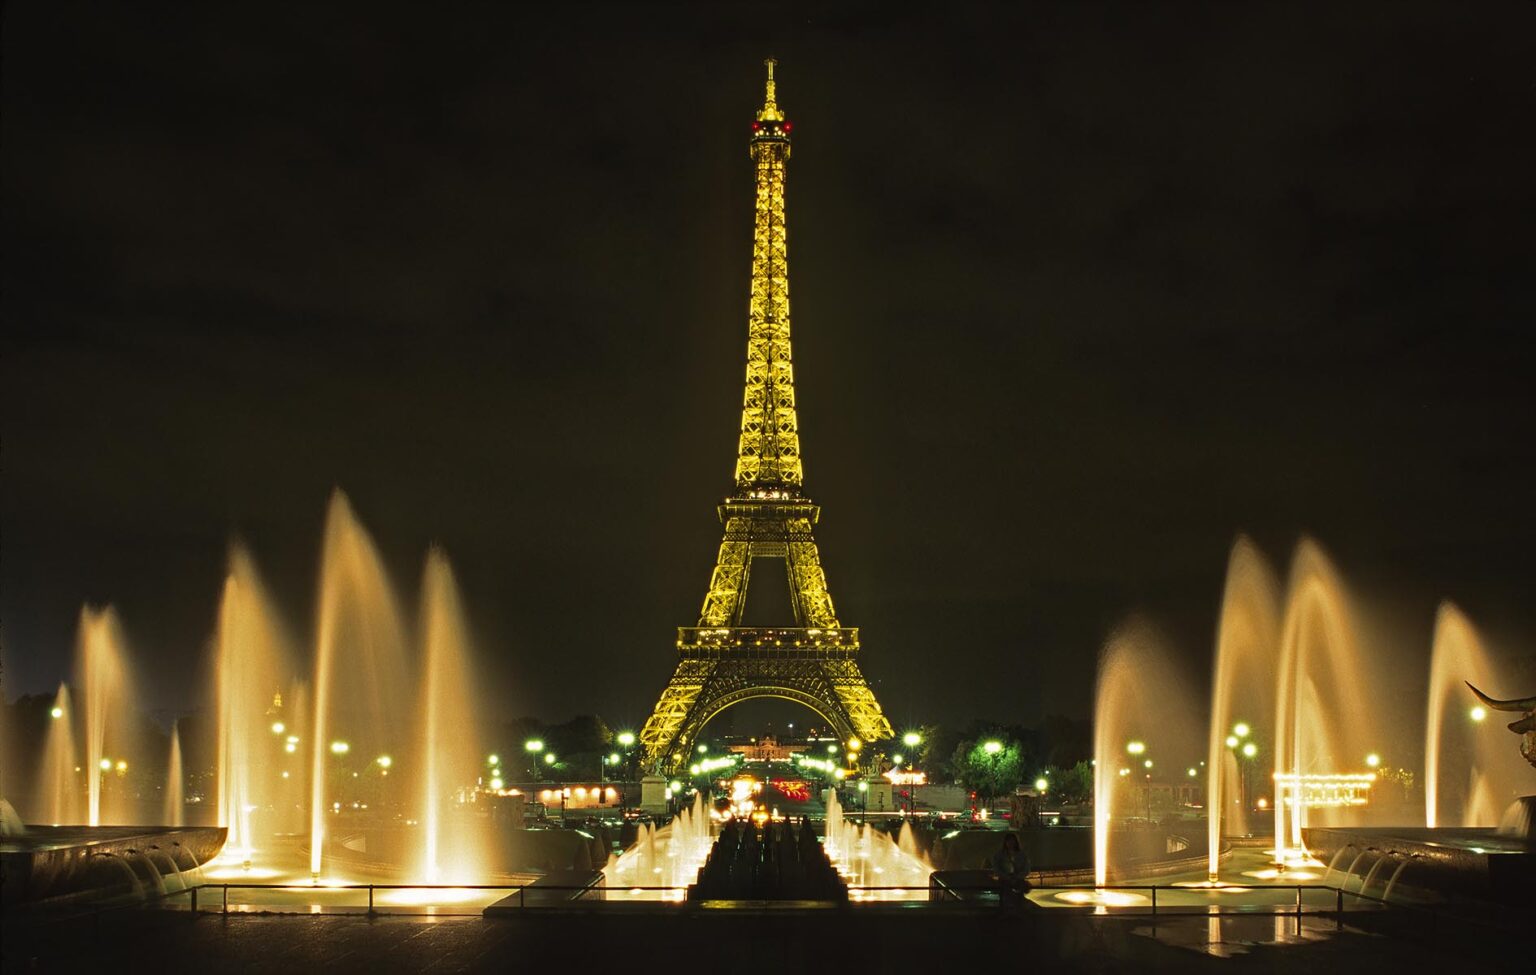 Night shot of The EIFFEL TOWER & the fountains of The PALACE OF CHAILLON - PARIS, FRANCE